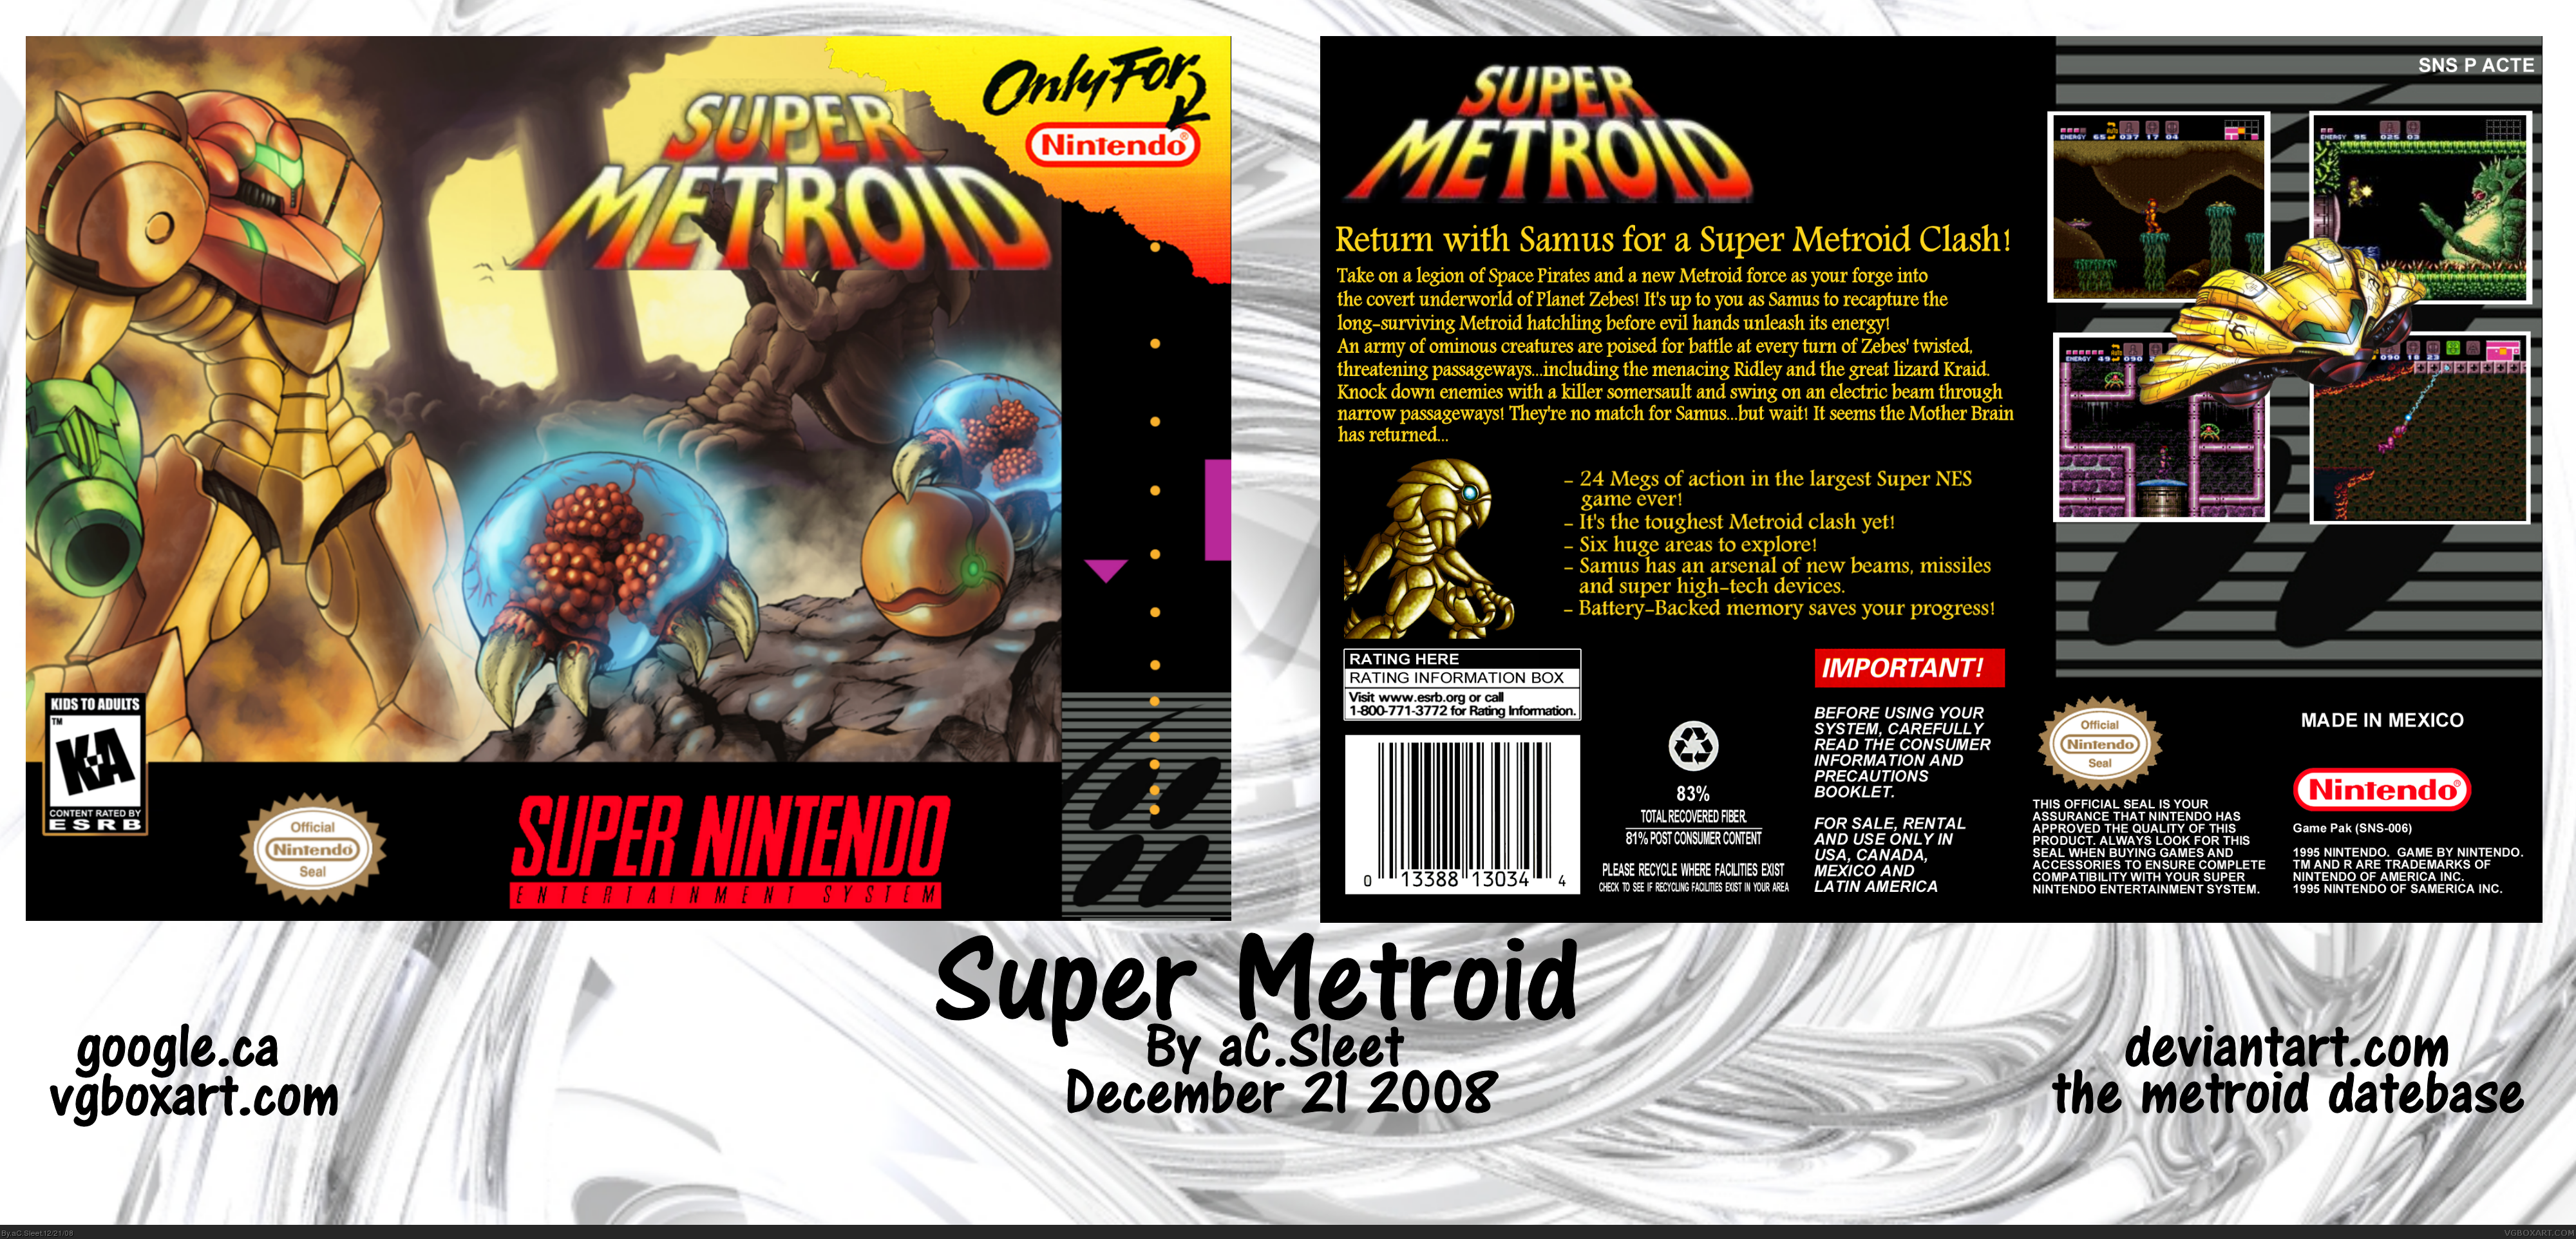 Viewing full size Super Metroid box cover.